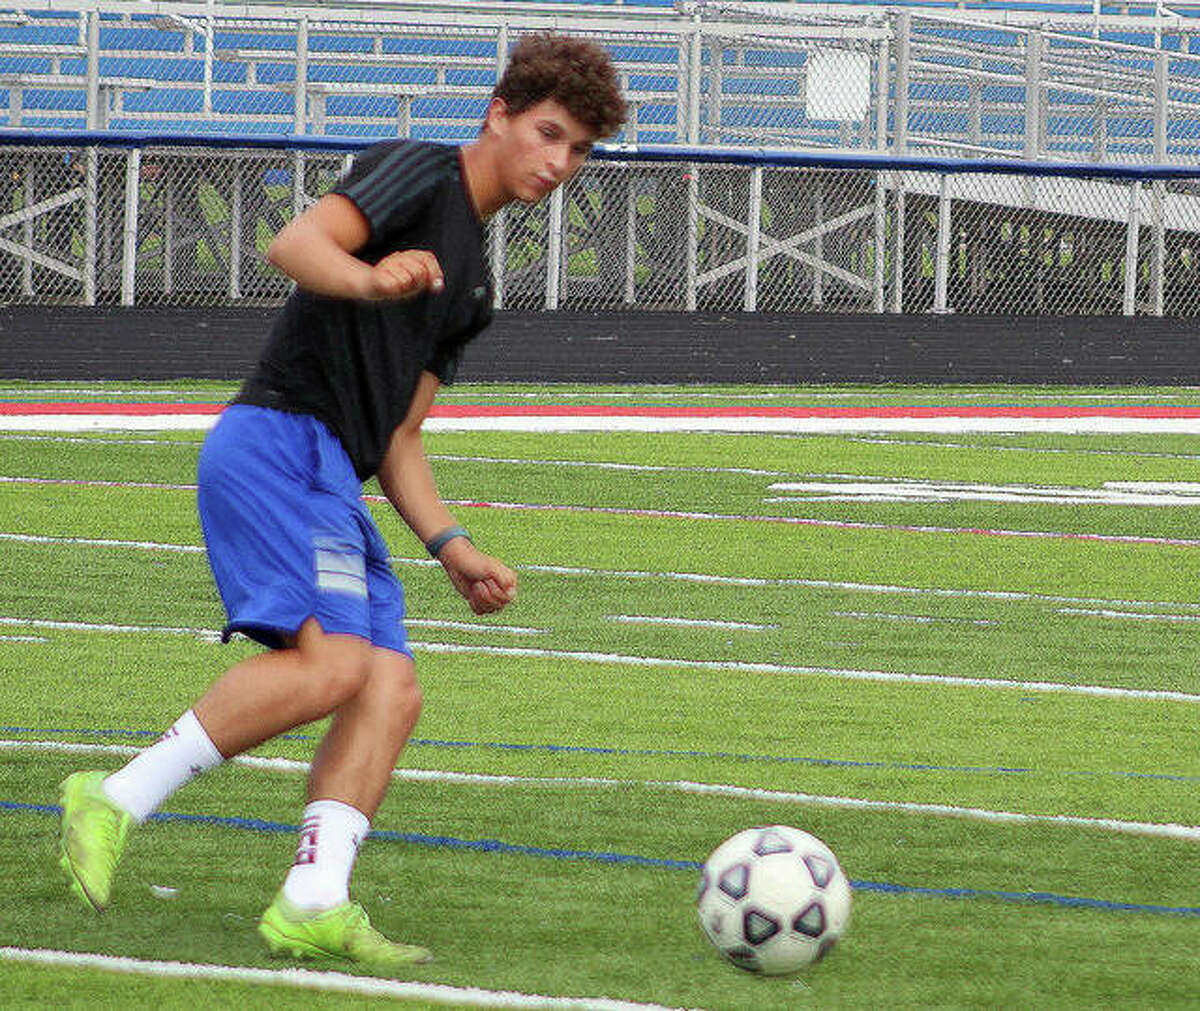 Trieton Park of Carlinville, shown in a practice session, scored the only goal of the game in Wednesday night’s 1-0 Cavies victory over North Mac in Carlinville. He was assisted by Levi Yudinsky. Park is third in scoring in the St. Louis area with 20 goals and nine assists.